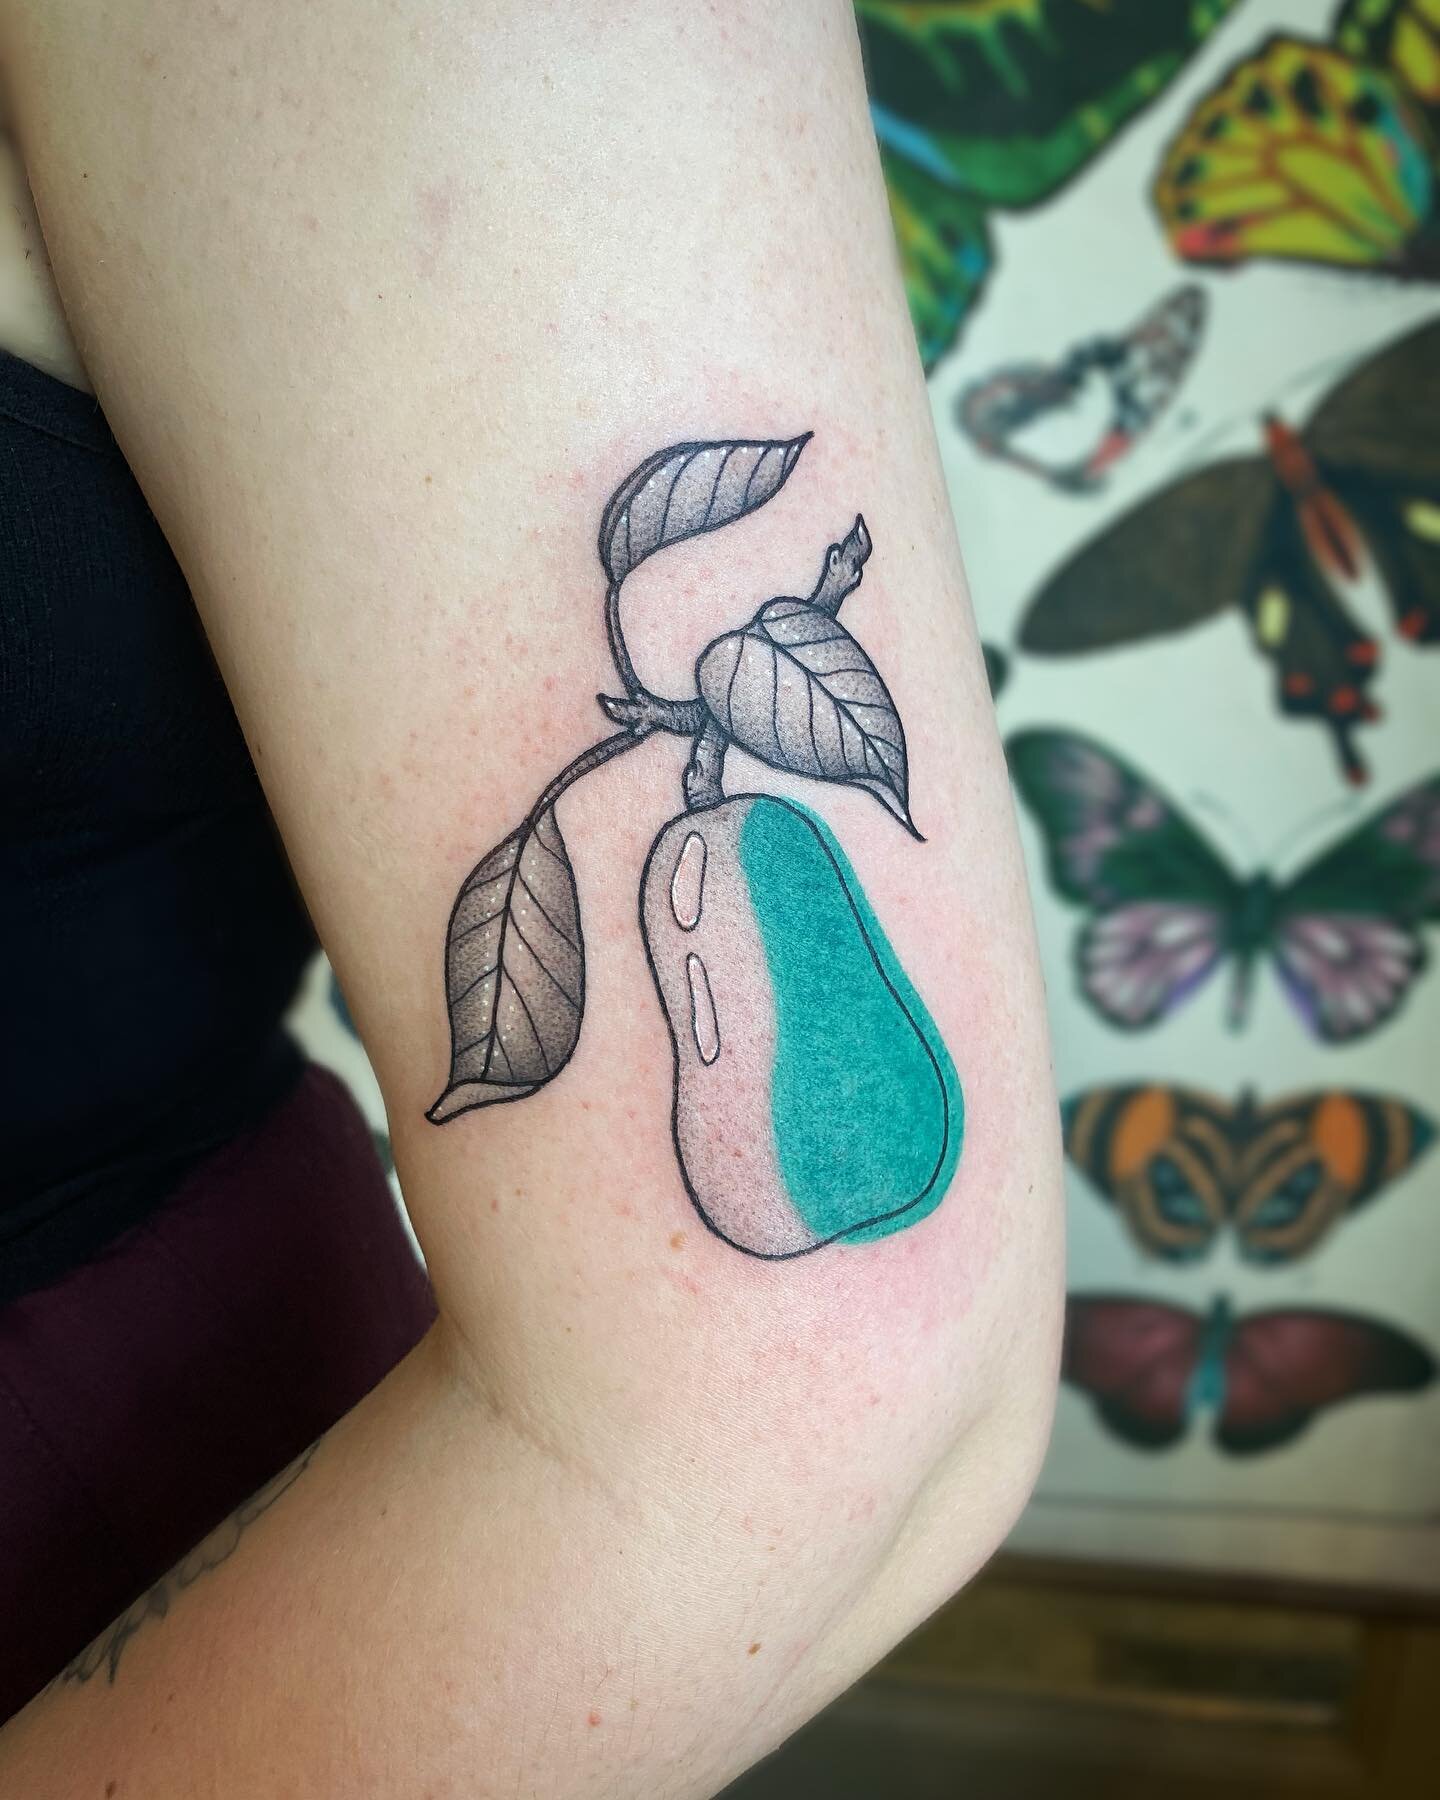 ▪️pear-fect▪️

Got to do another one of my flash pieces finally! This cutie pear lives forever on @katina.dix now ✨ Thankful for you!

Would really love to do more of my funky colored flash pieces, available in my highlight, DM or email if you want o